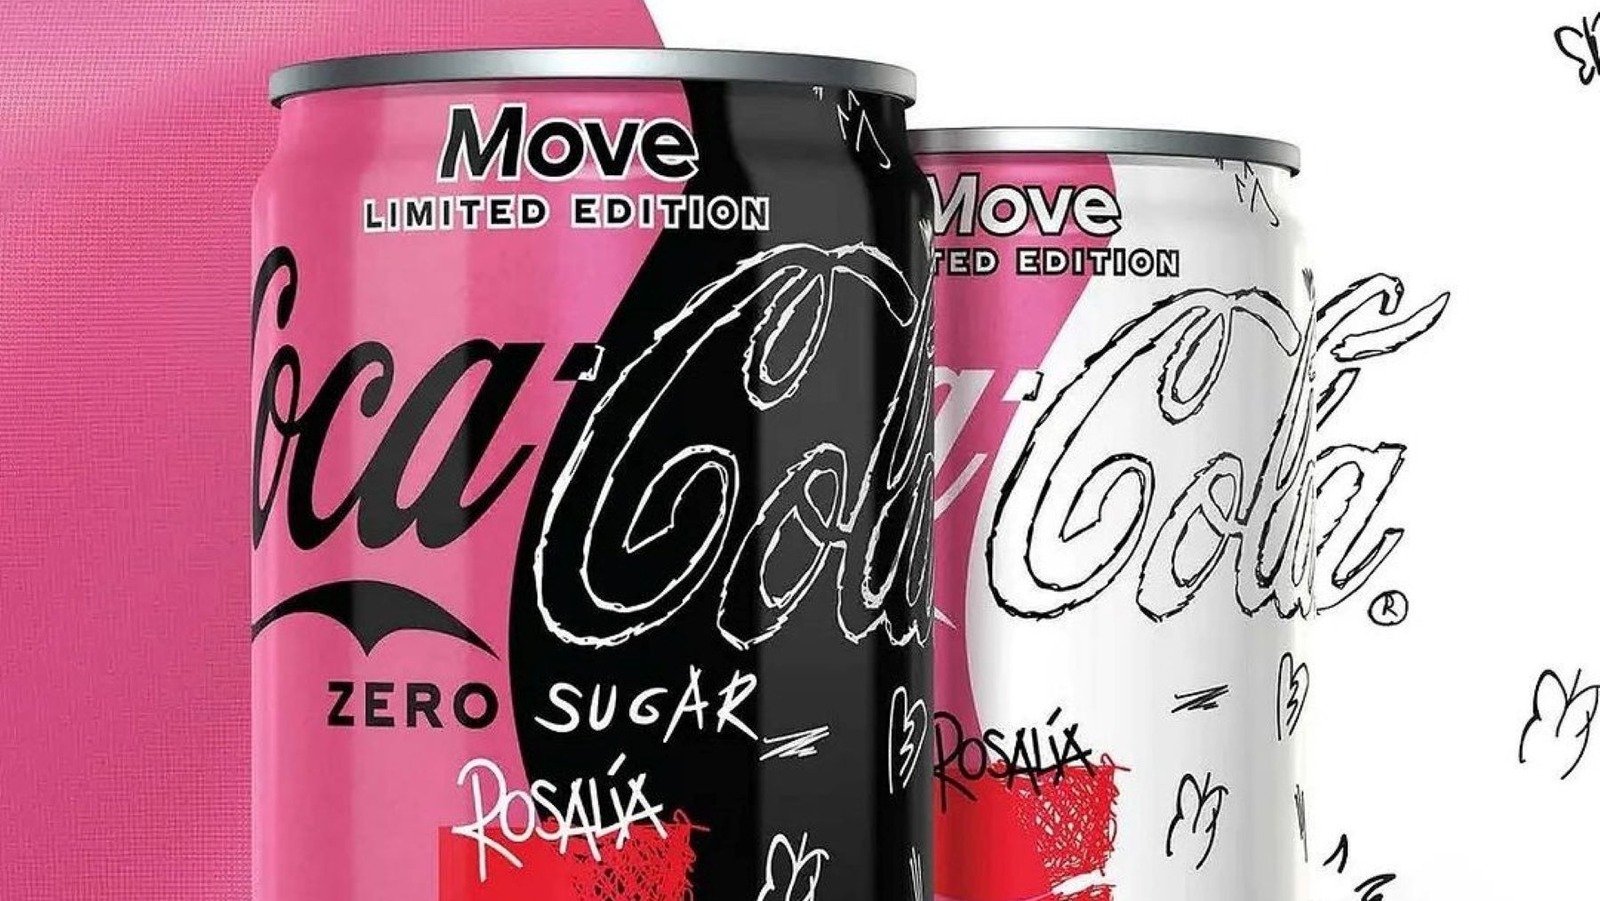 Coca-Cola introduces ‘transformation-flavored’ soda in its latest limited-time offering